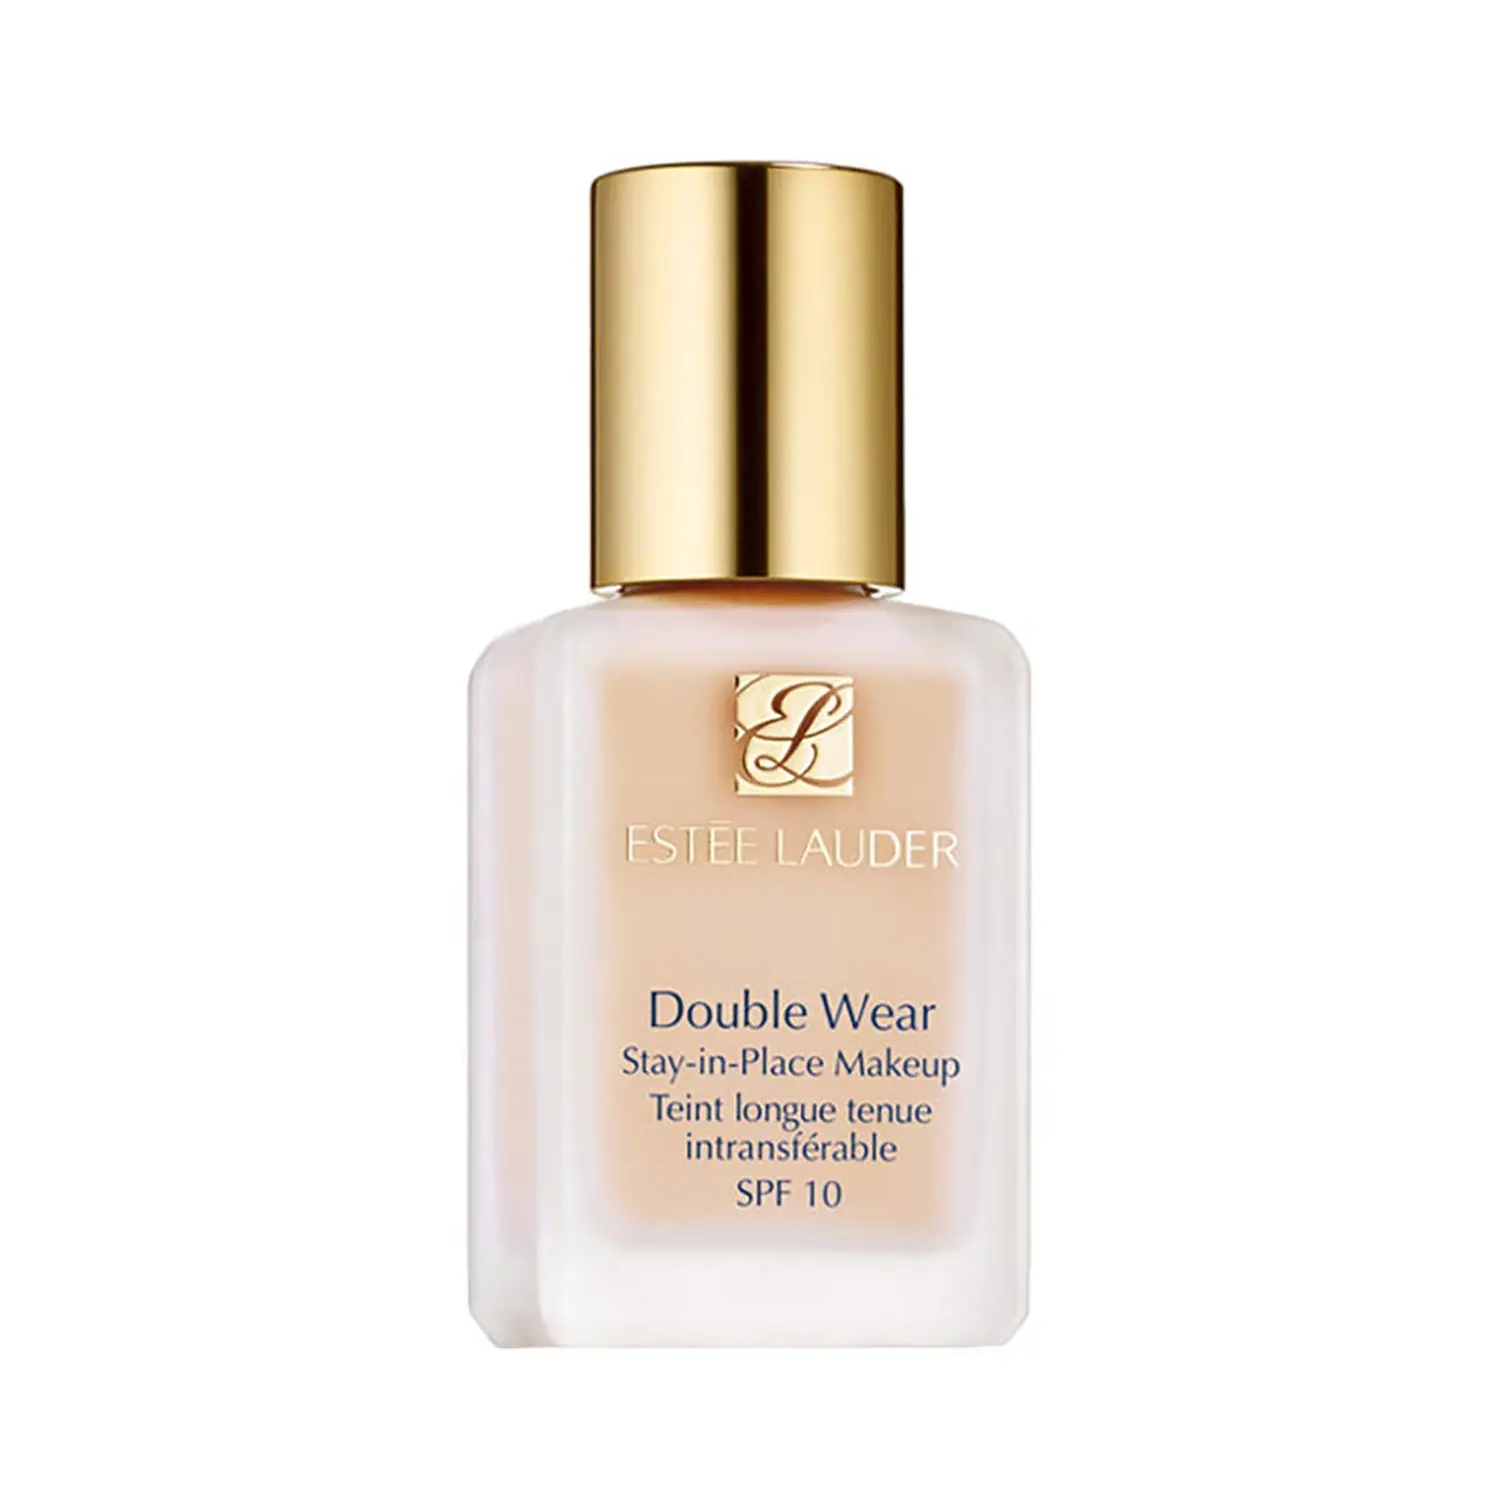 Estee Lauder Double Wear Stay-In-Place Makeup Foundation SPF10 - 0N1 Alabaster (30ml)